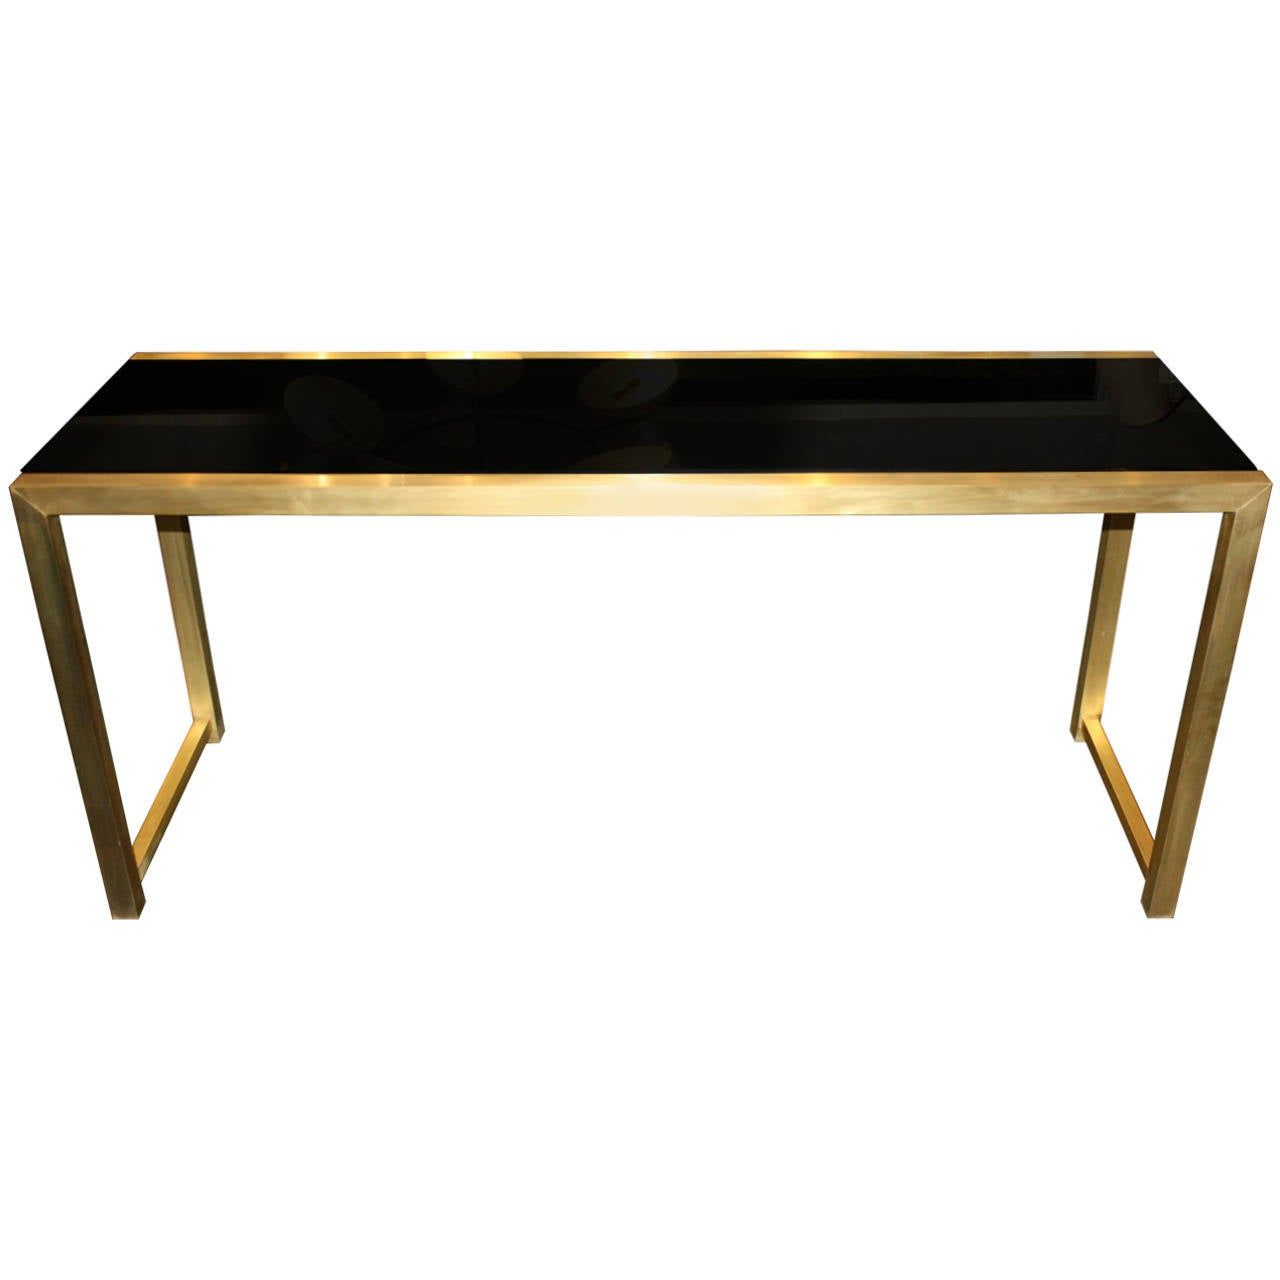 French Brass Console Table For Sale At 1stdibs Within Hammered Antique Brass Modern Console Tables (View 4 of 20)